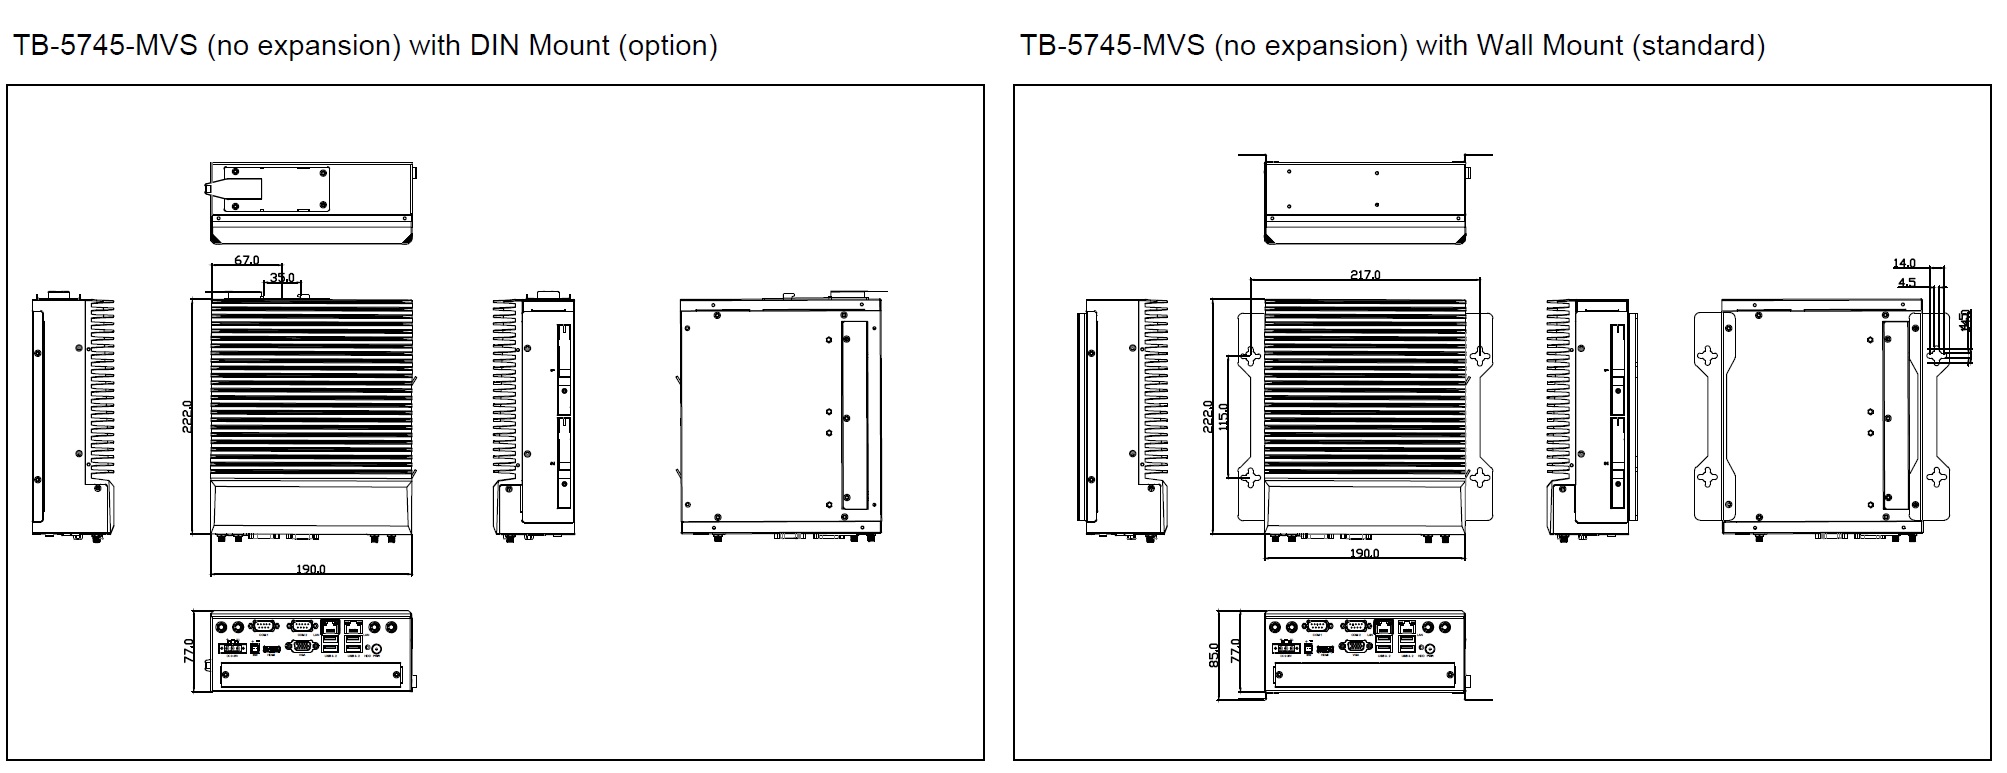 tb-5745 technical drawing no expansion